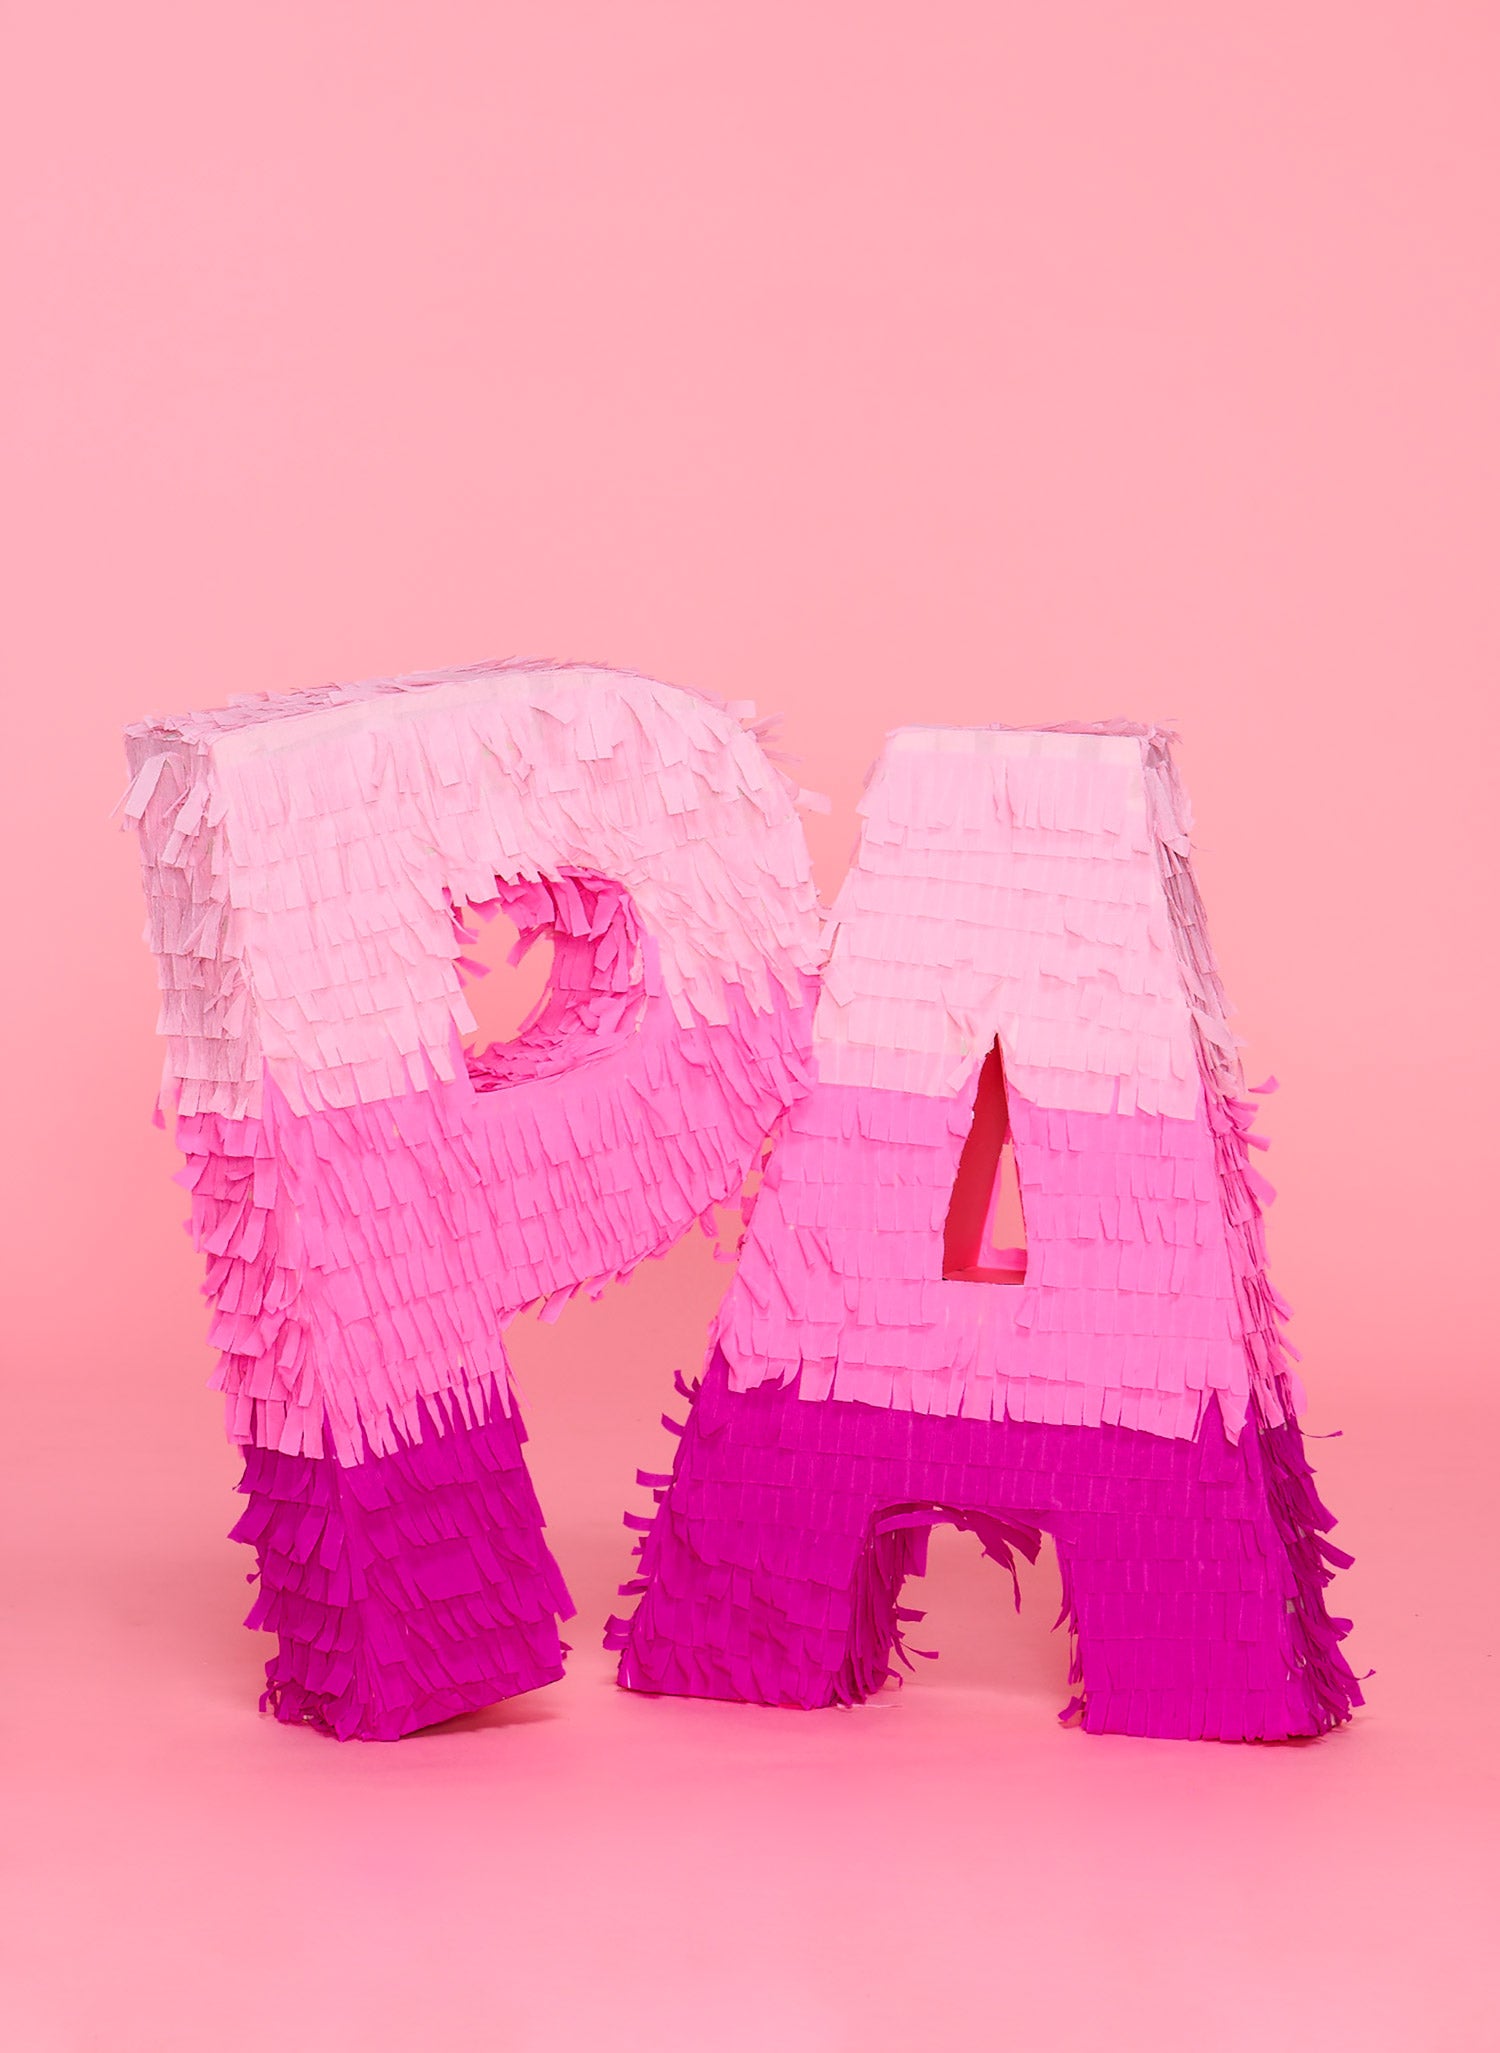 Two giant, oversized, handmade P and A shaped piñatas in 3 shades of pink sit against a pink background. 